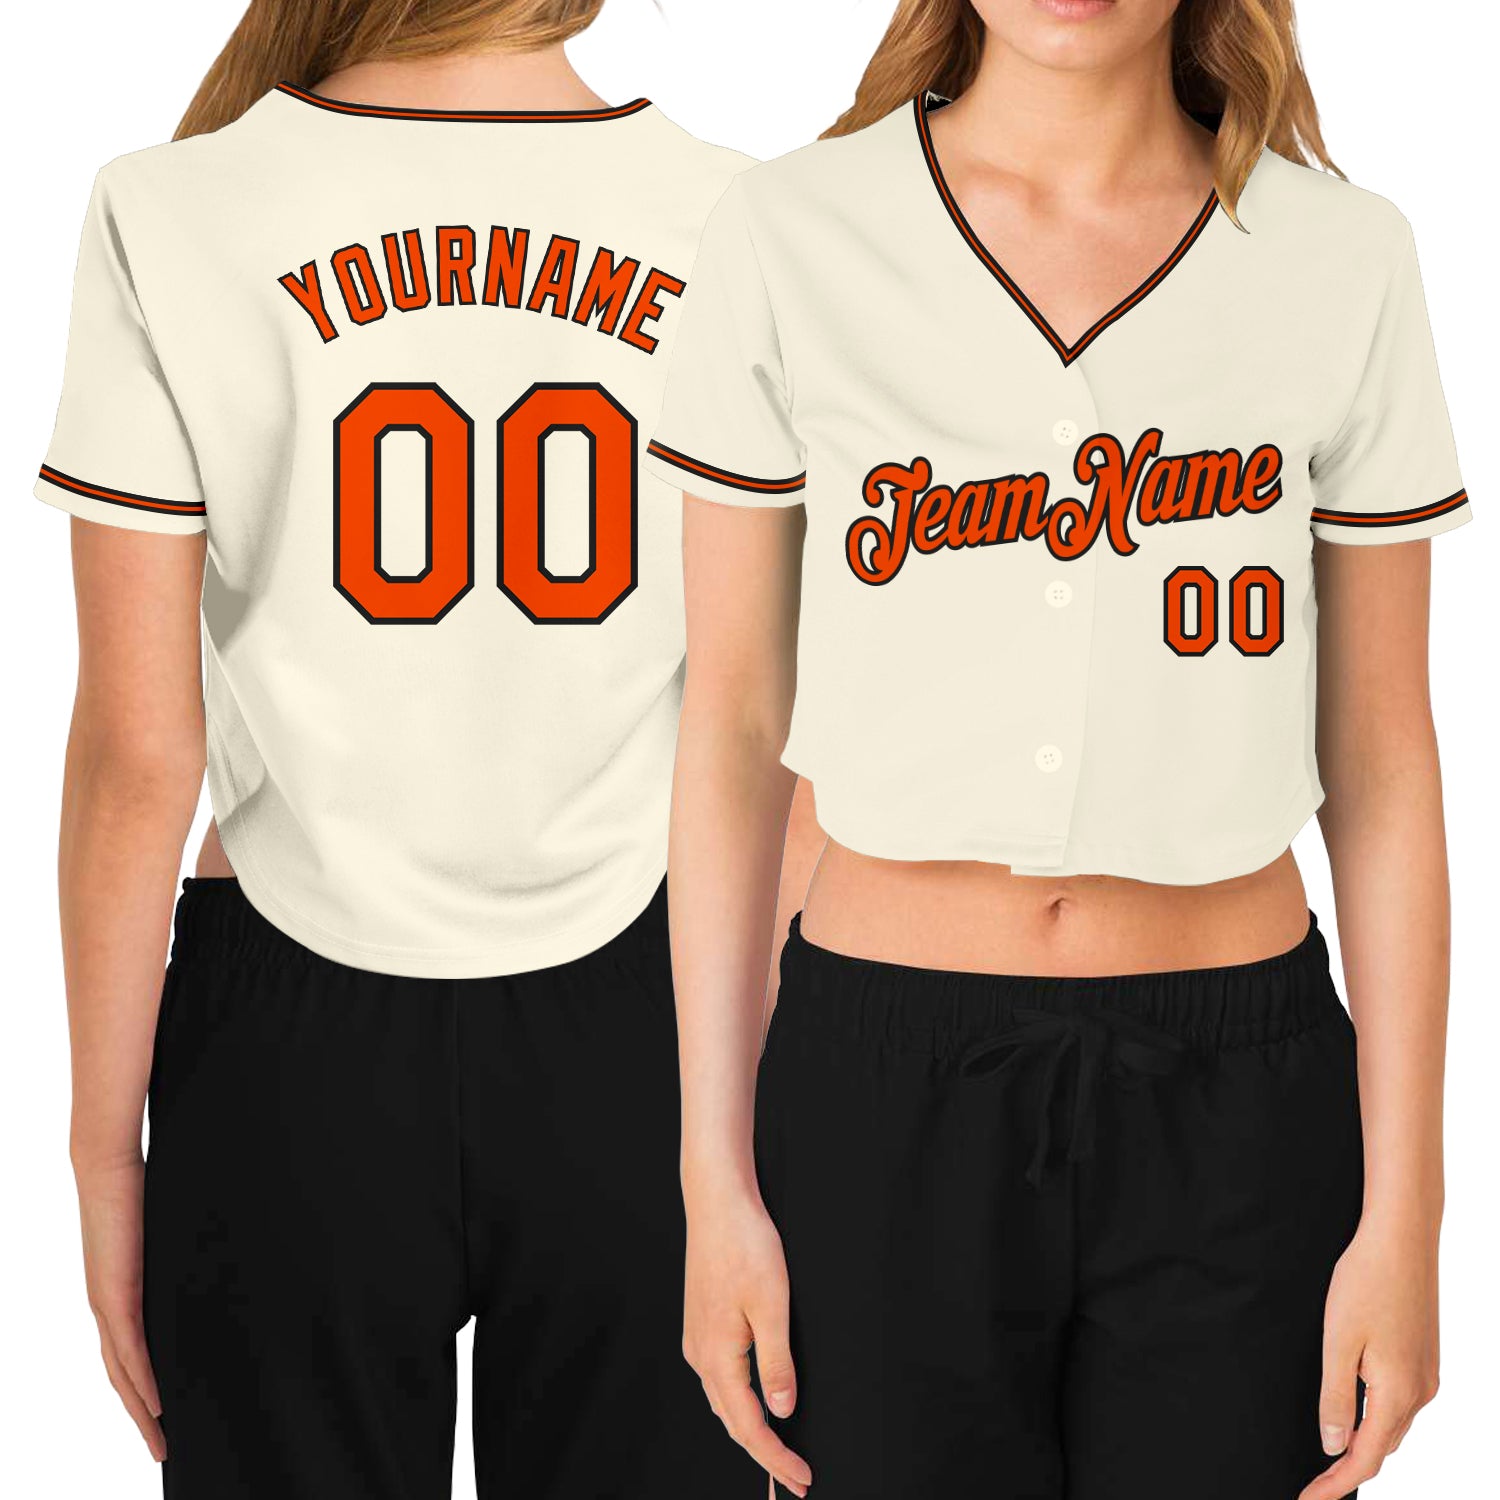 San Francisco Giants Personalized Jerseys Customized Shirts with